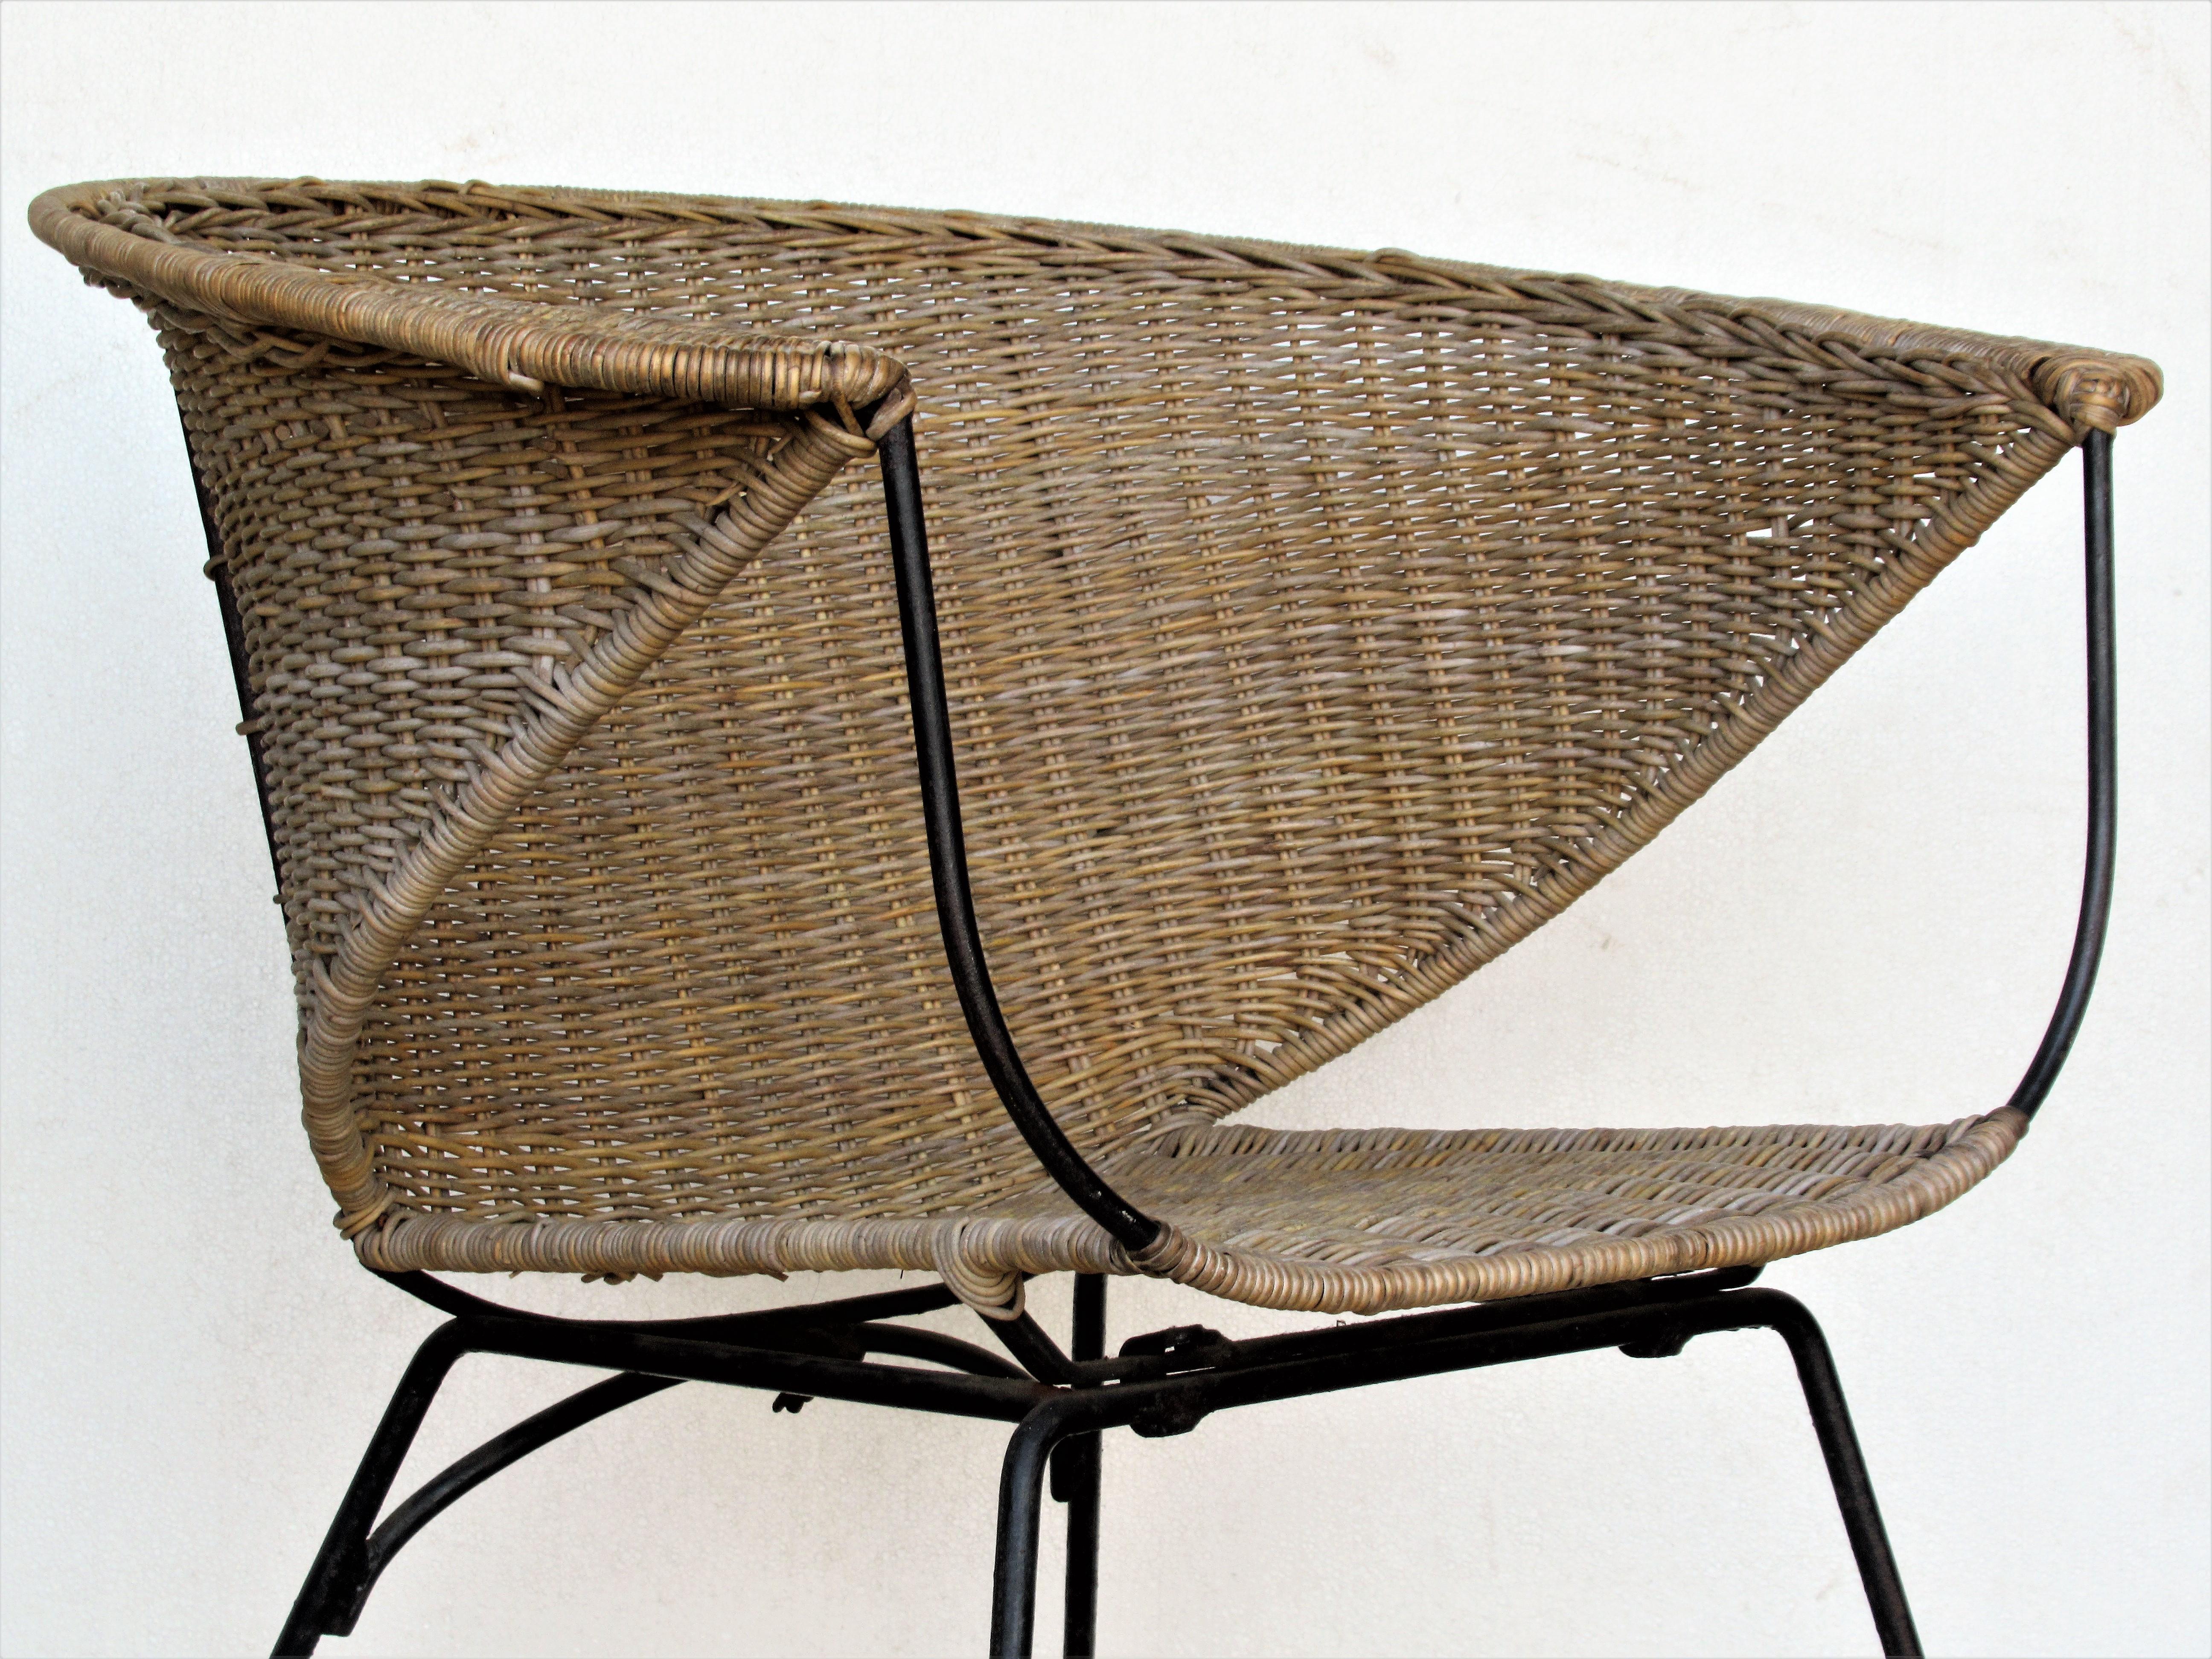 Mid 20th century modern iron and woven wicker rattan chair with a beautifully constructed sleek sculptural form. Look at all pictures and read condition report in comment